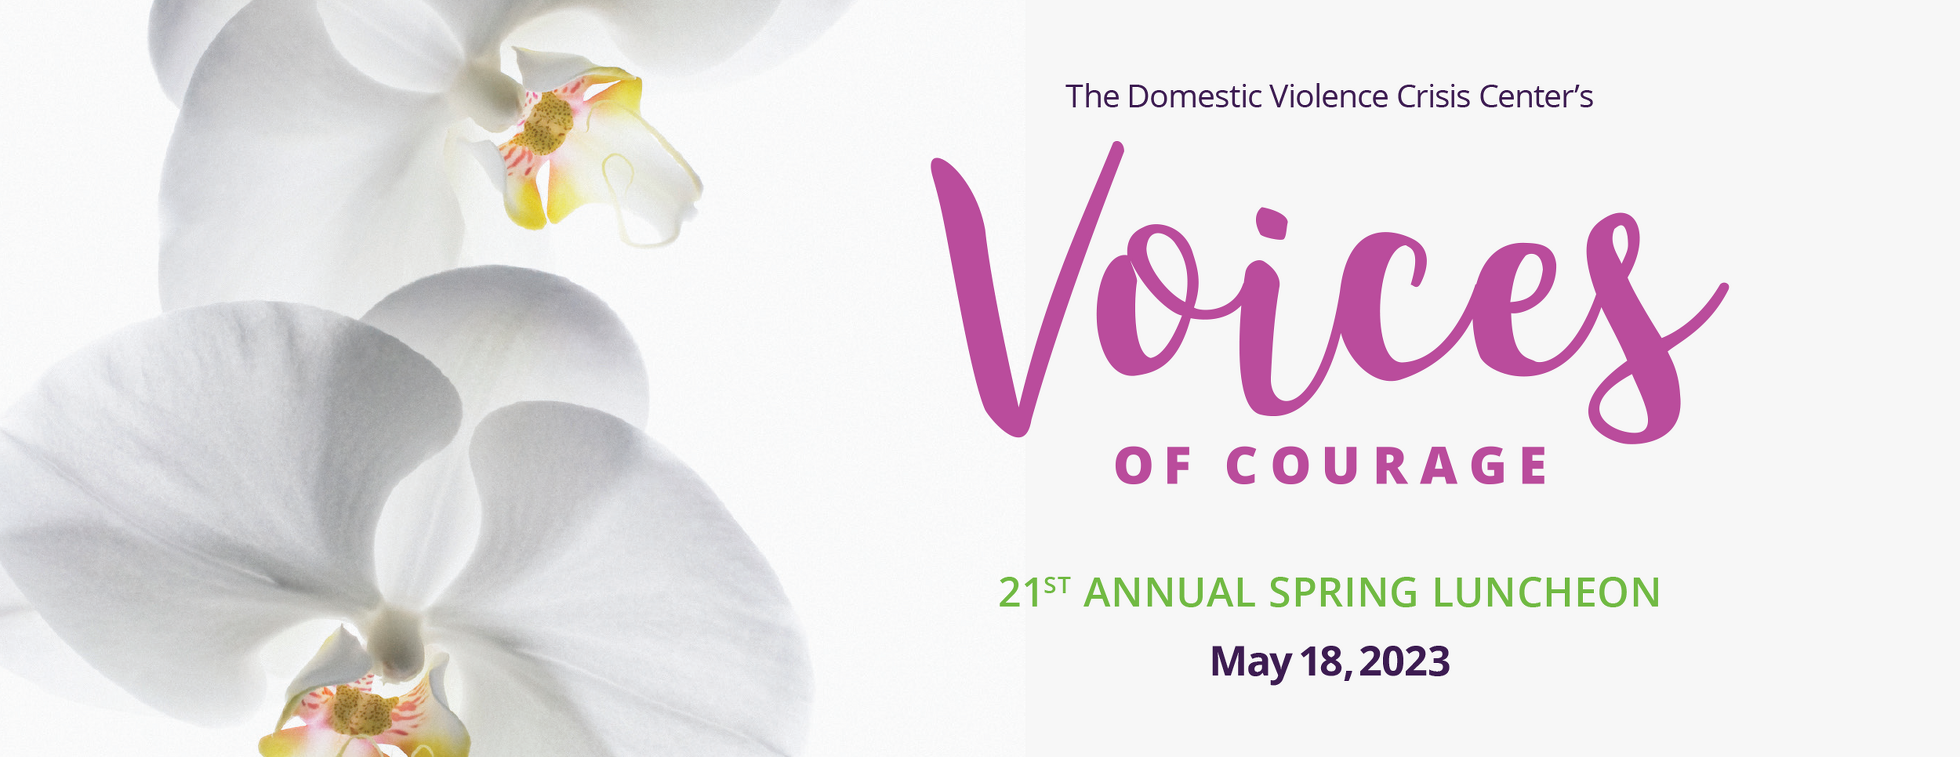 DVCC's Voices of Courage 21st Annual Spring Luncheon